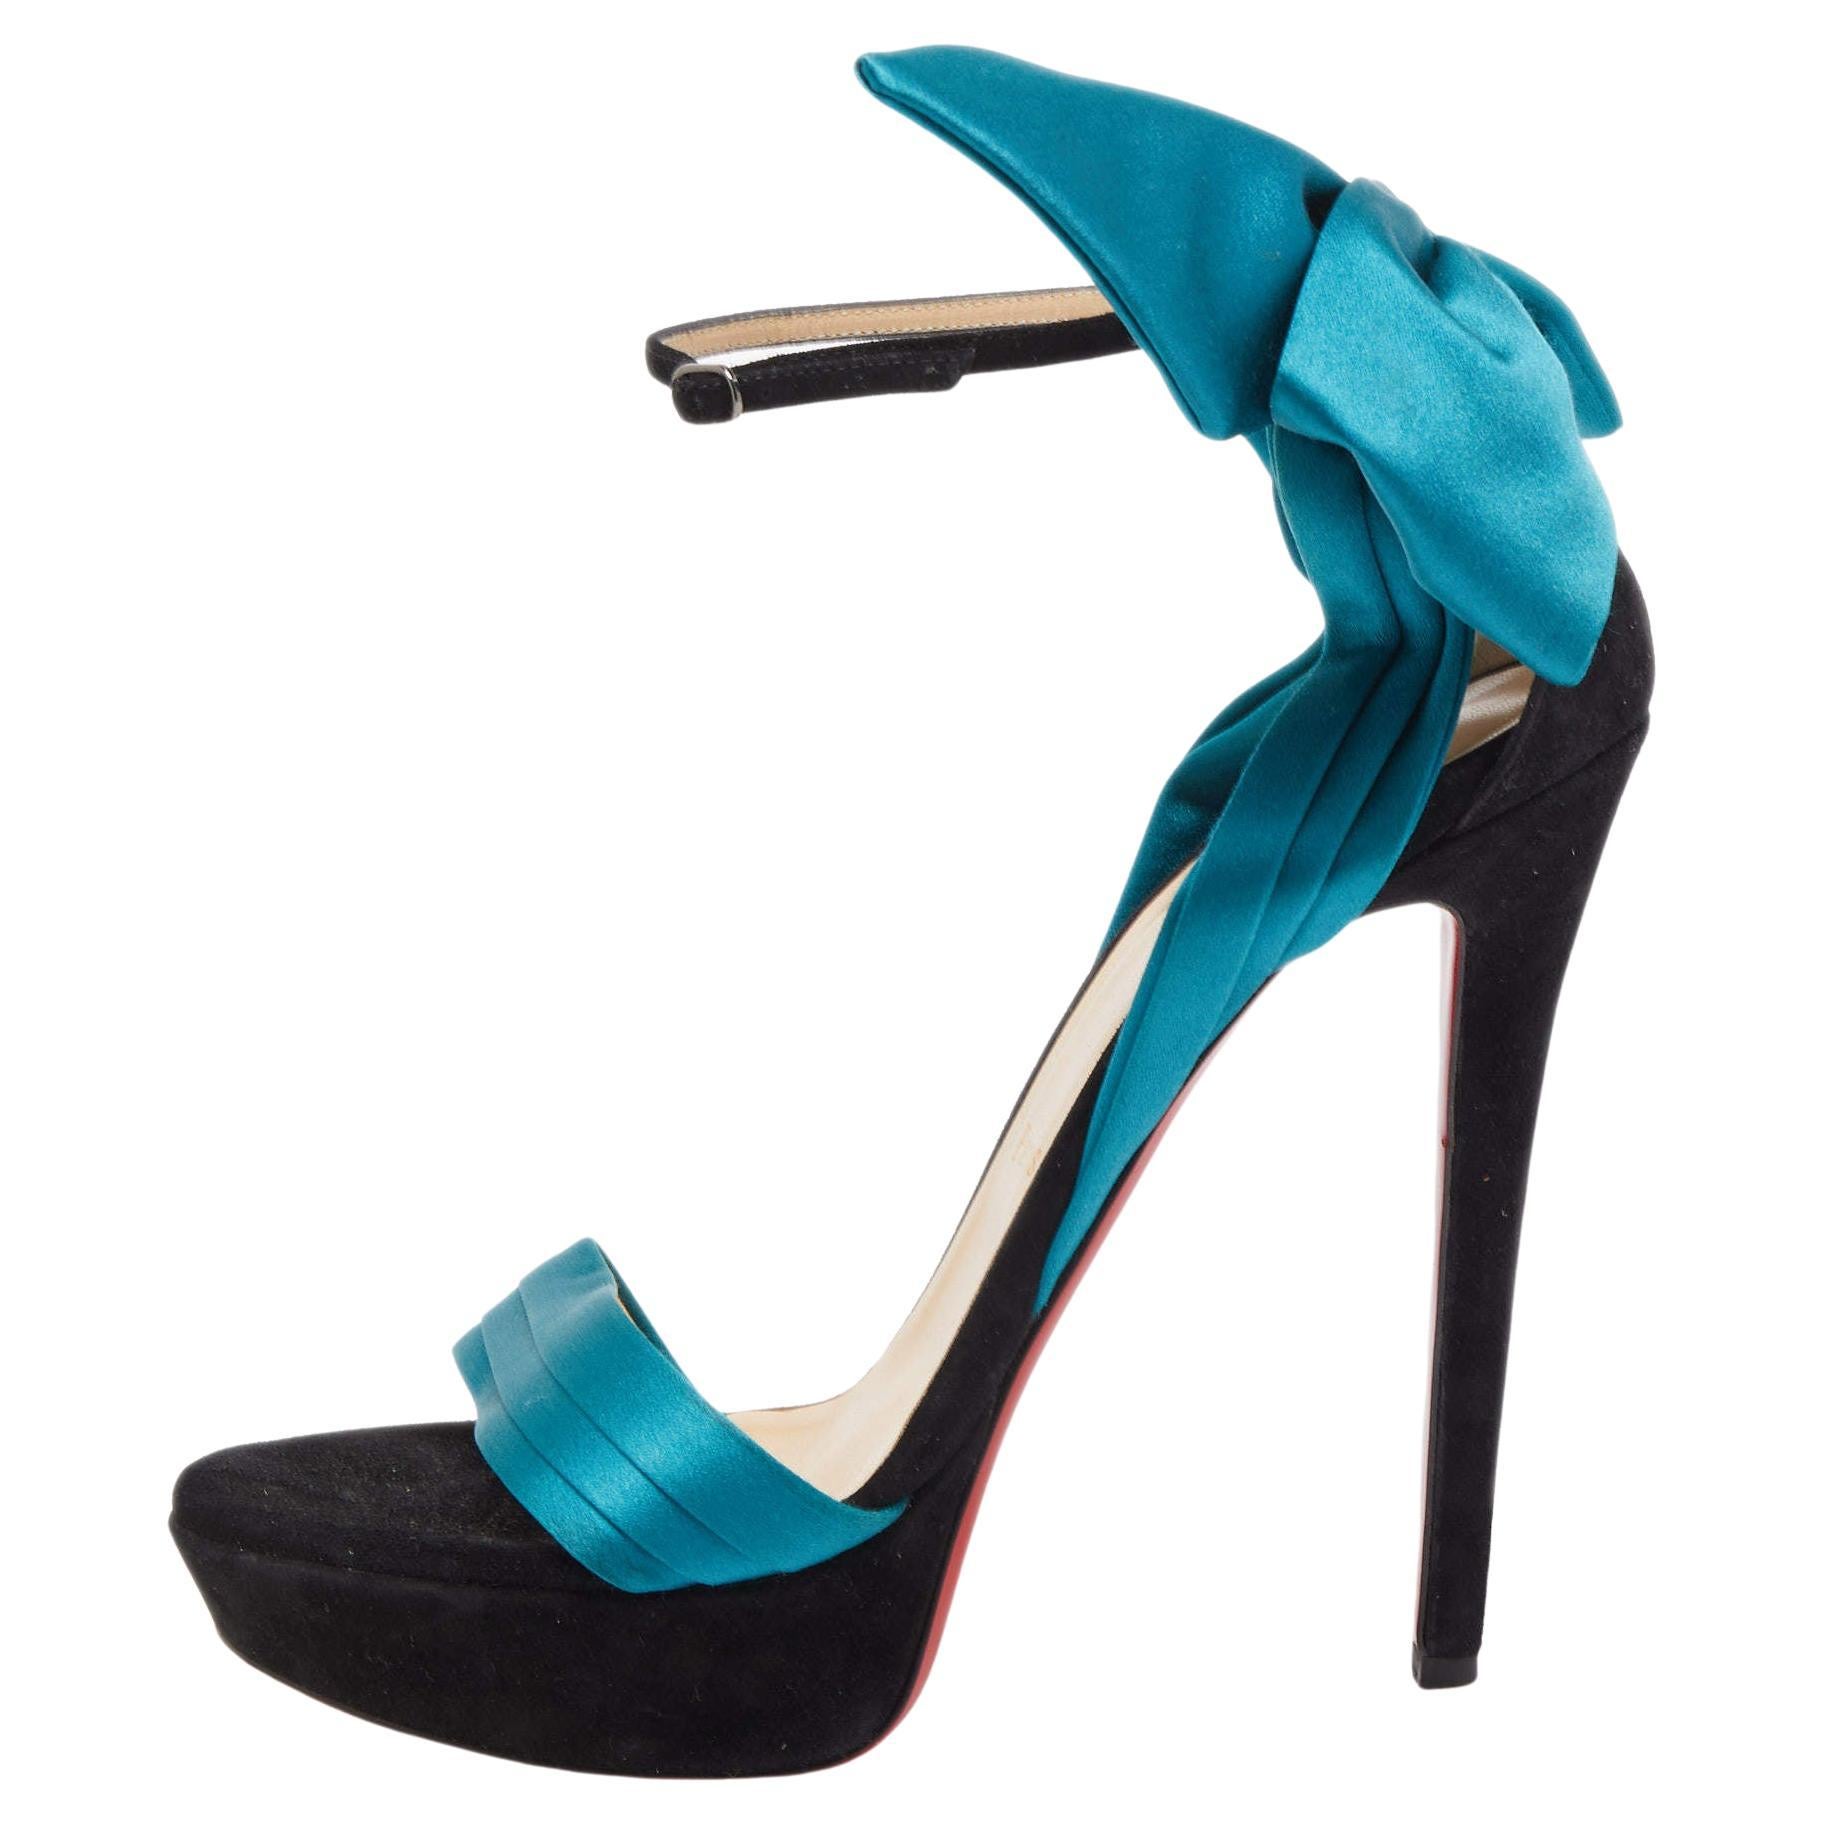 Christian Louboutin Teal/Black Satin and Suede Vampanodo Sandals Size 40.5